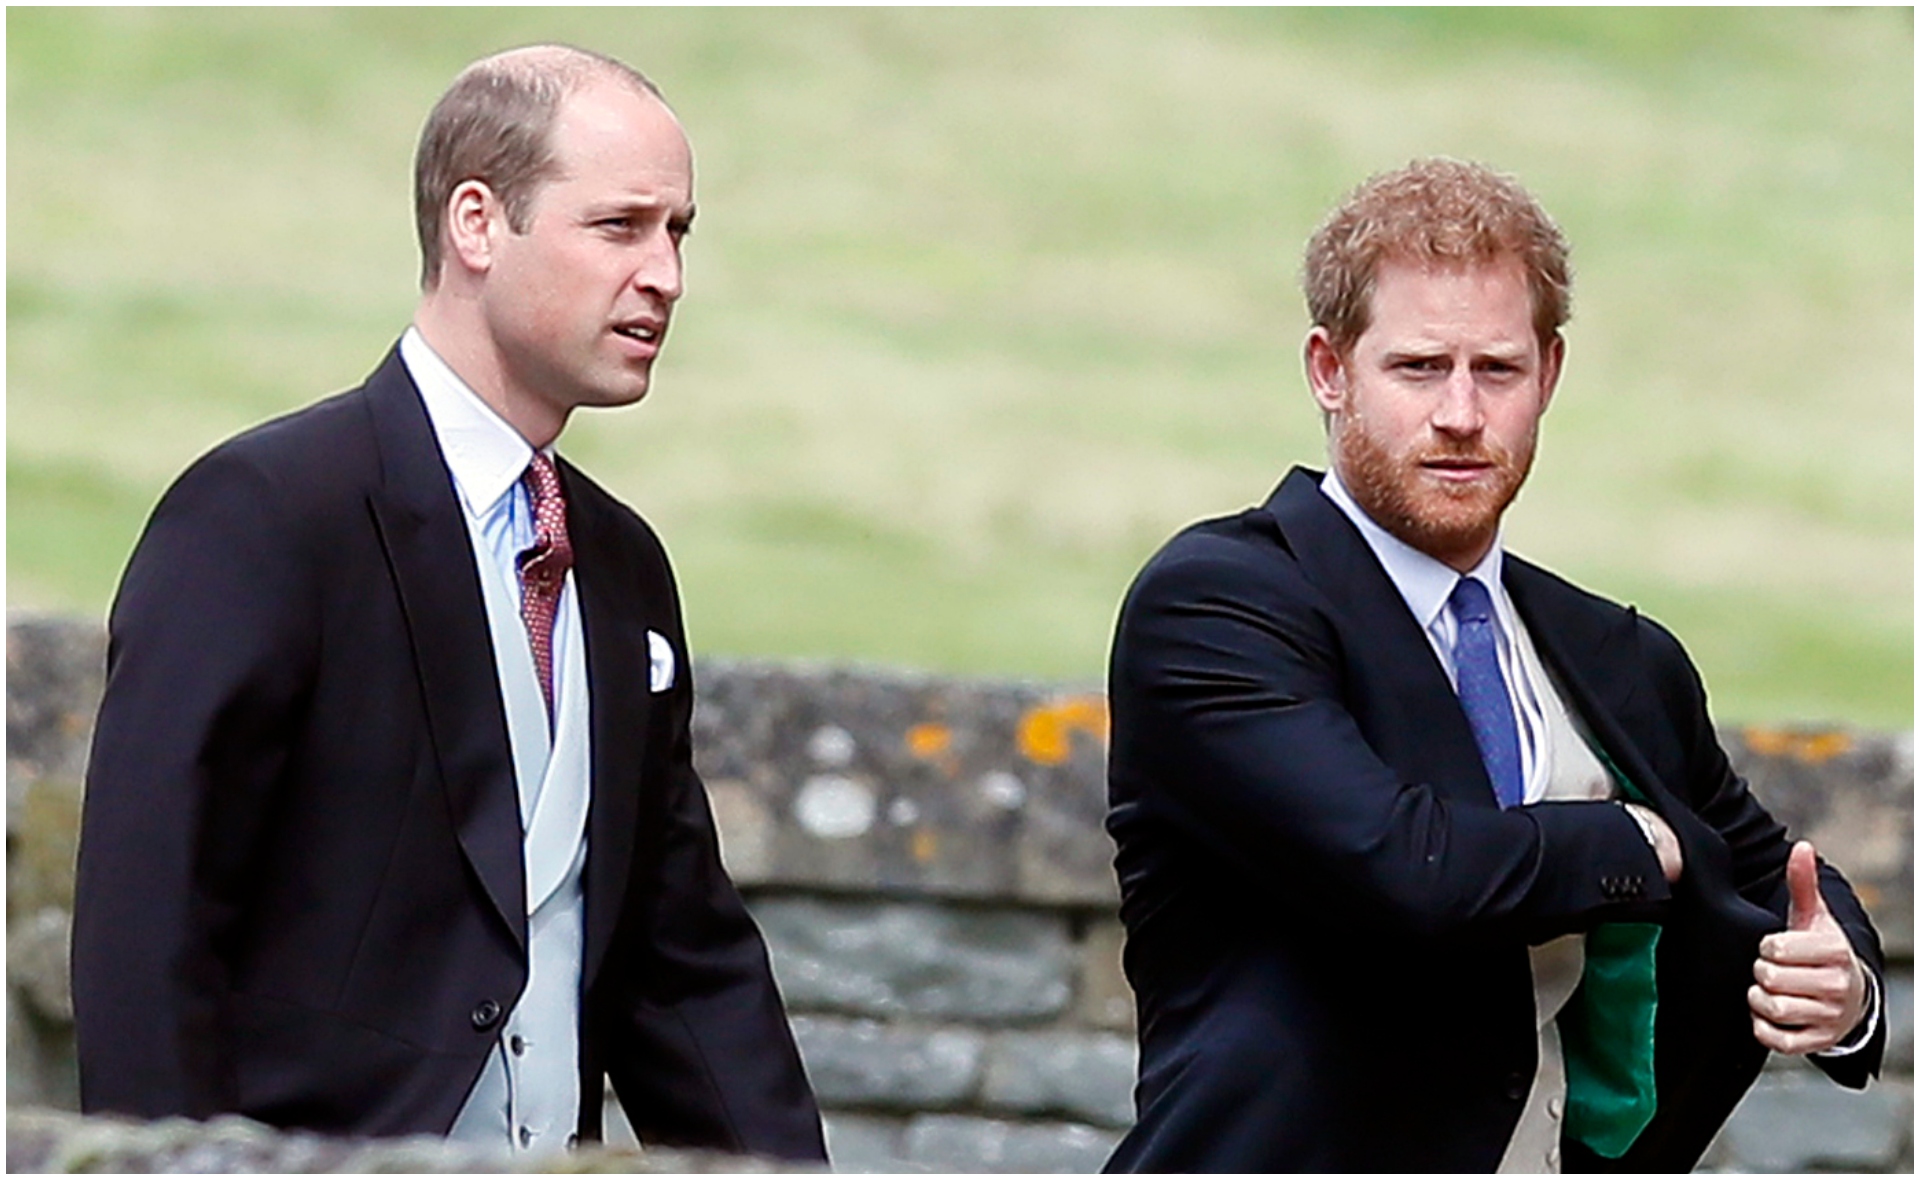 Prince Harry makes a surprise ‘appearance’ after touching down in the UK – and his brother William is top of mind